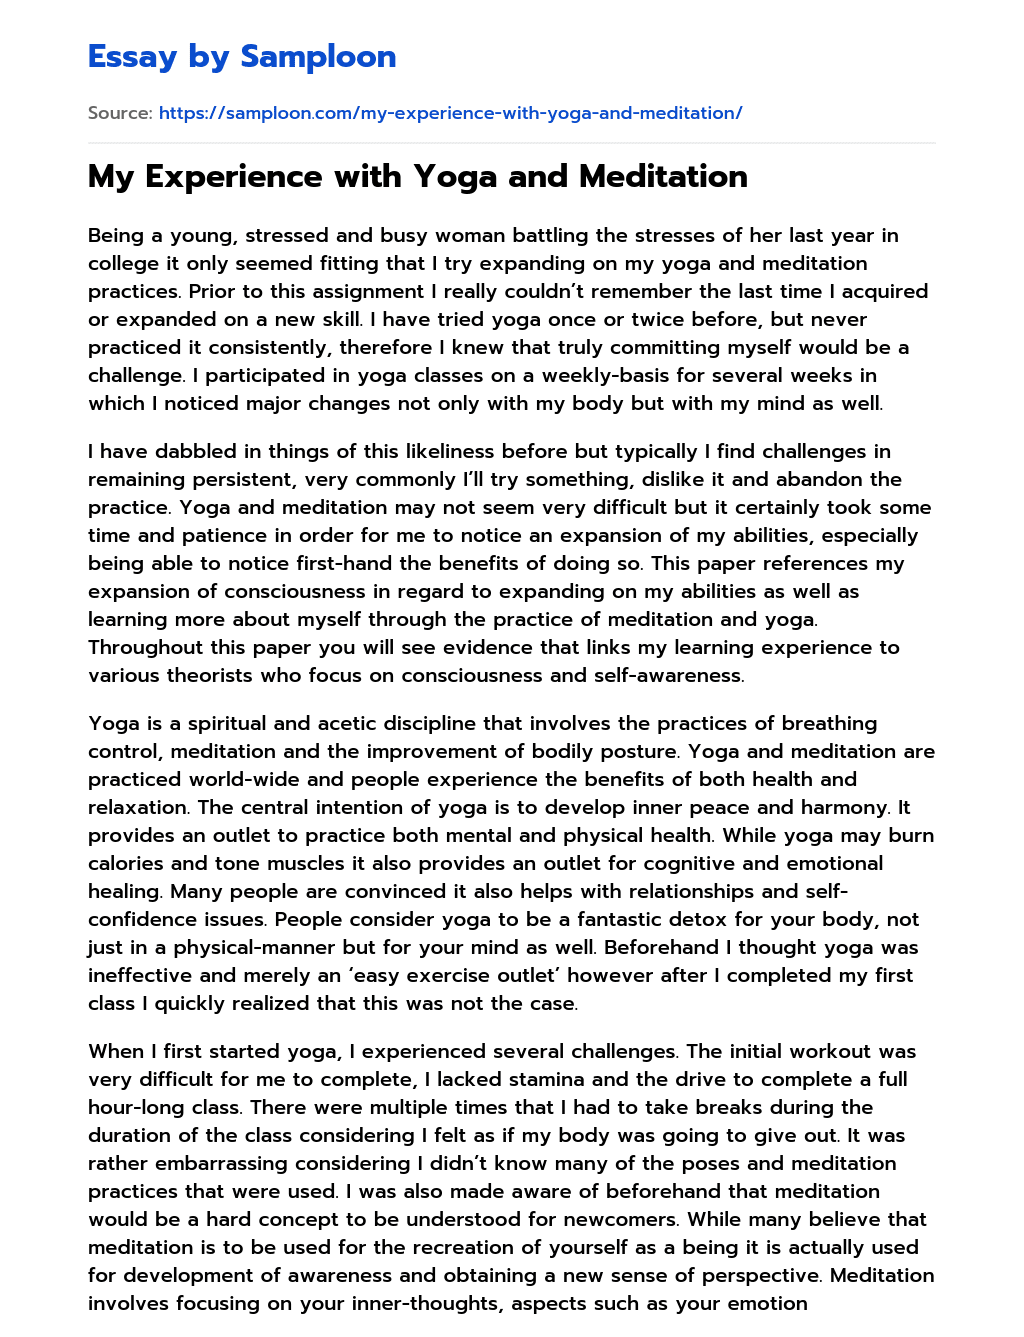 essay about experience in yoga